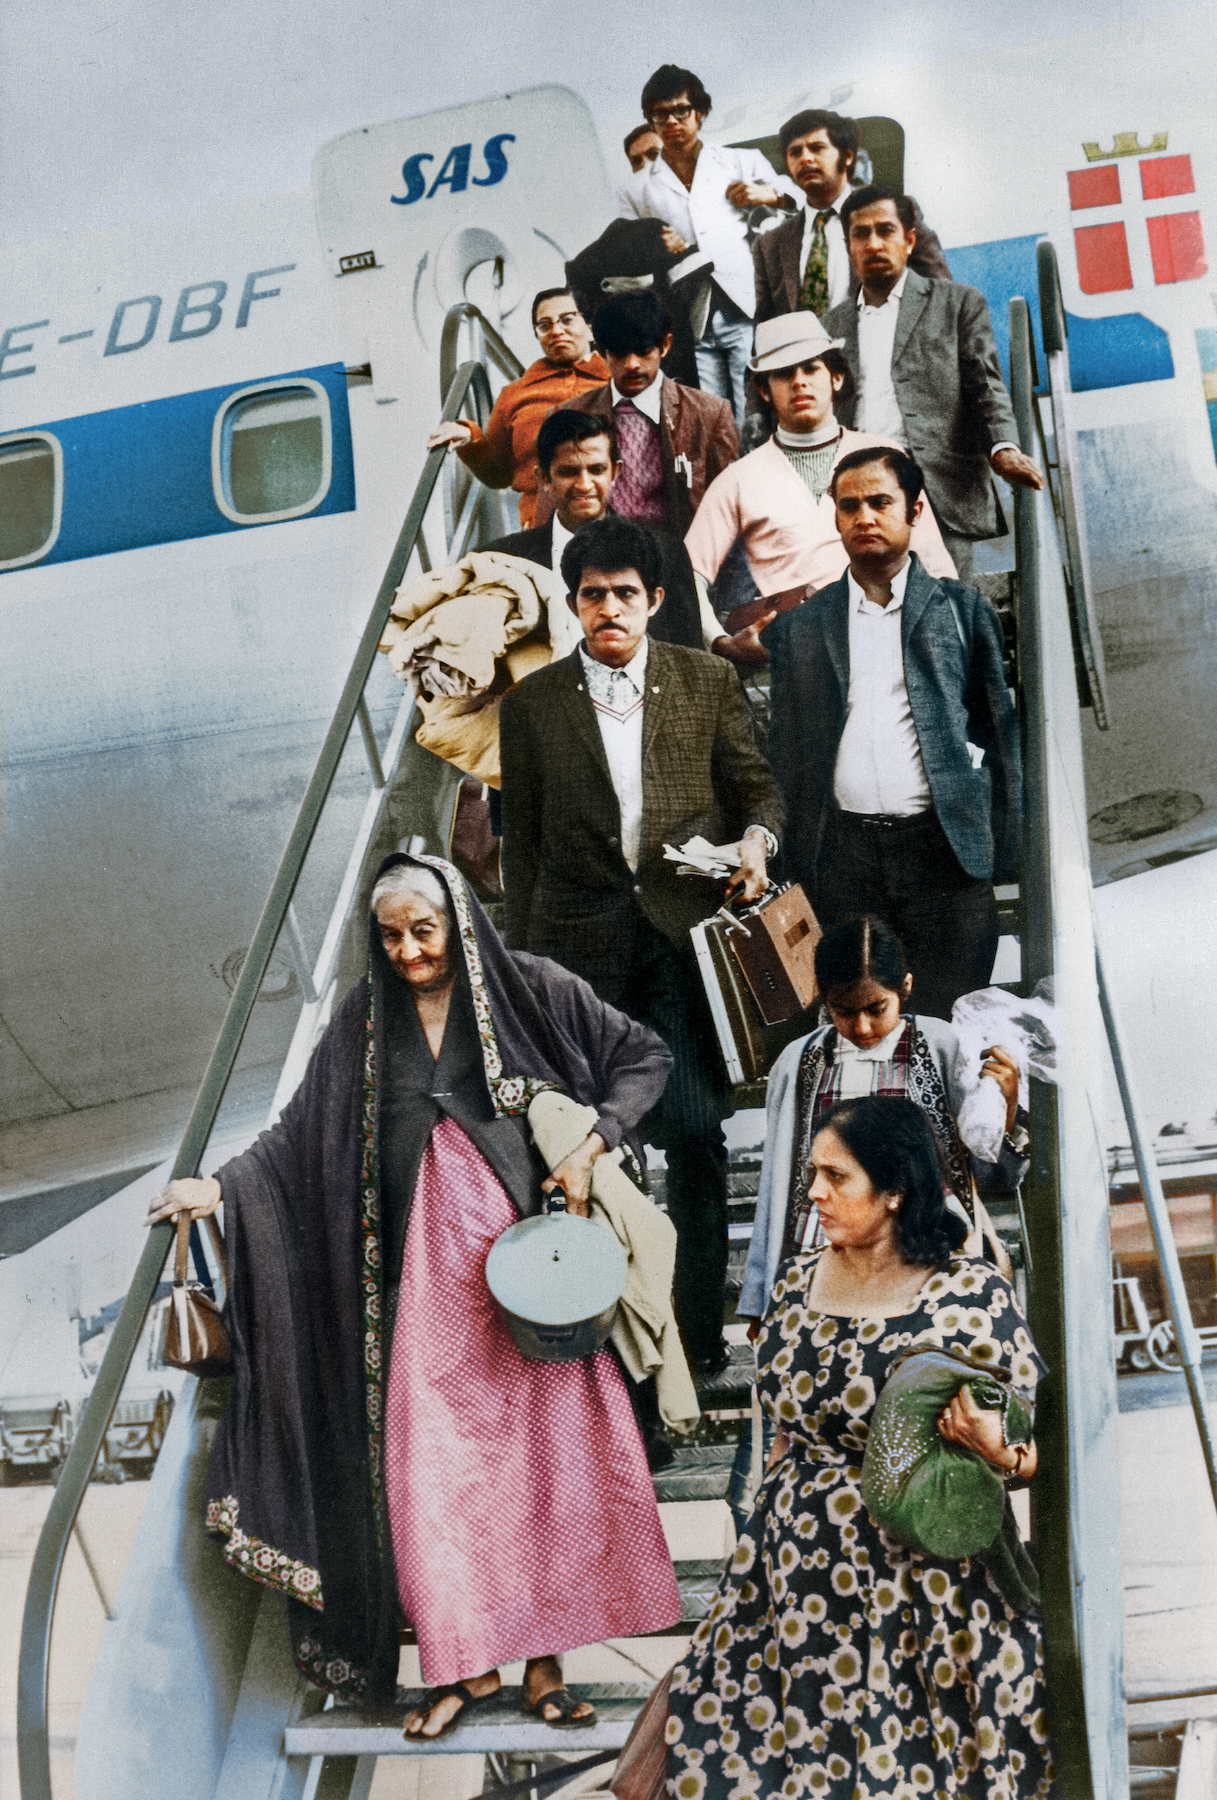 Arrival at Vienna airport of Uganda Asians, 1972. Colorized picture